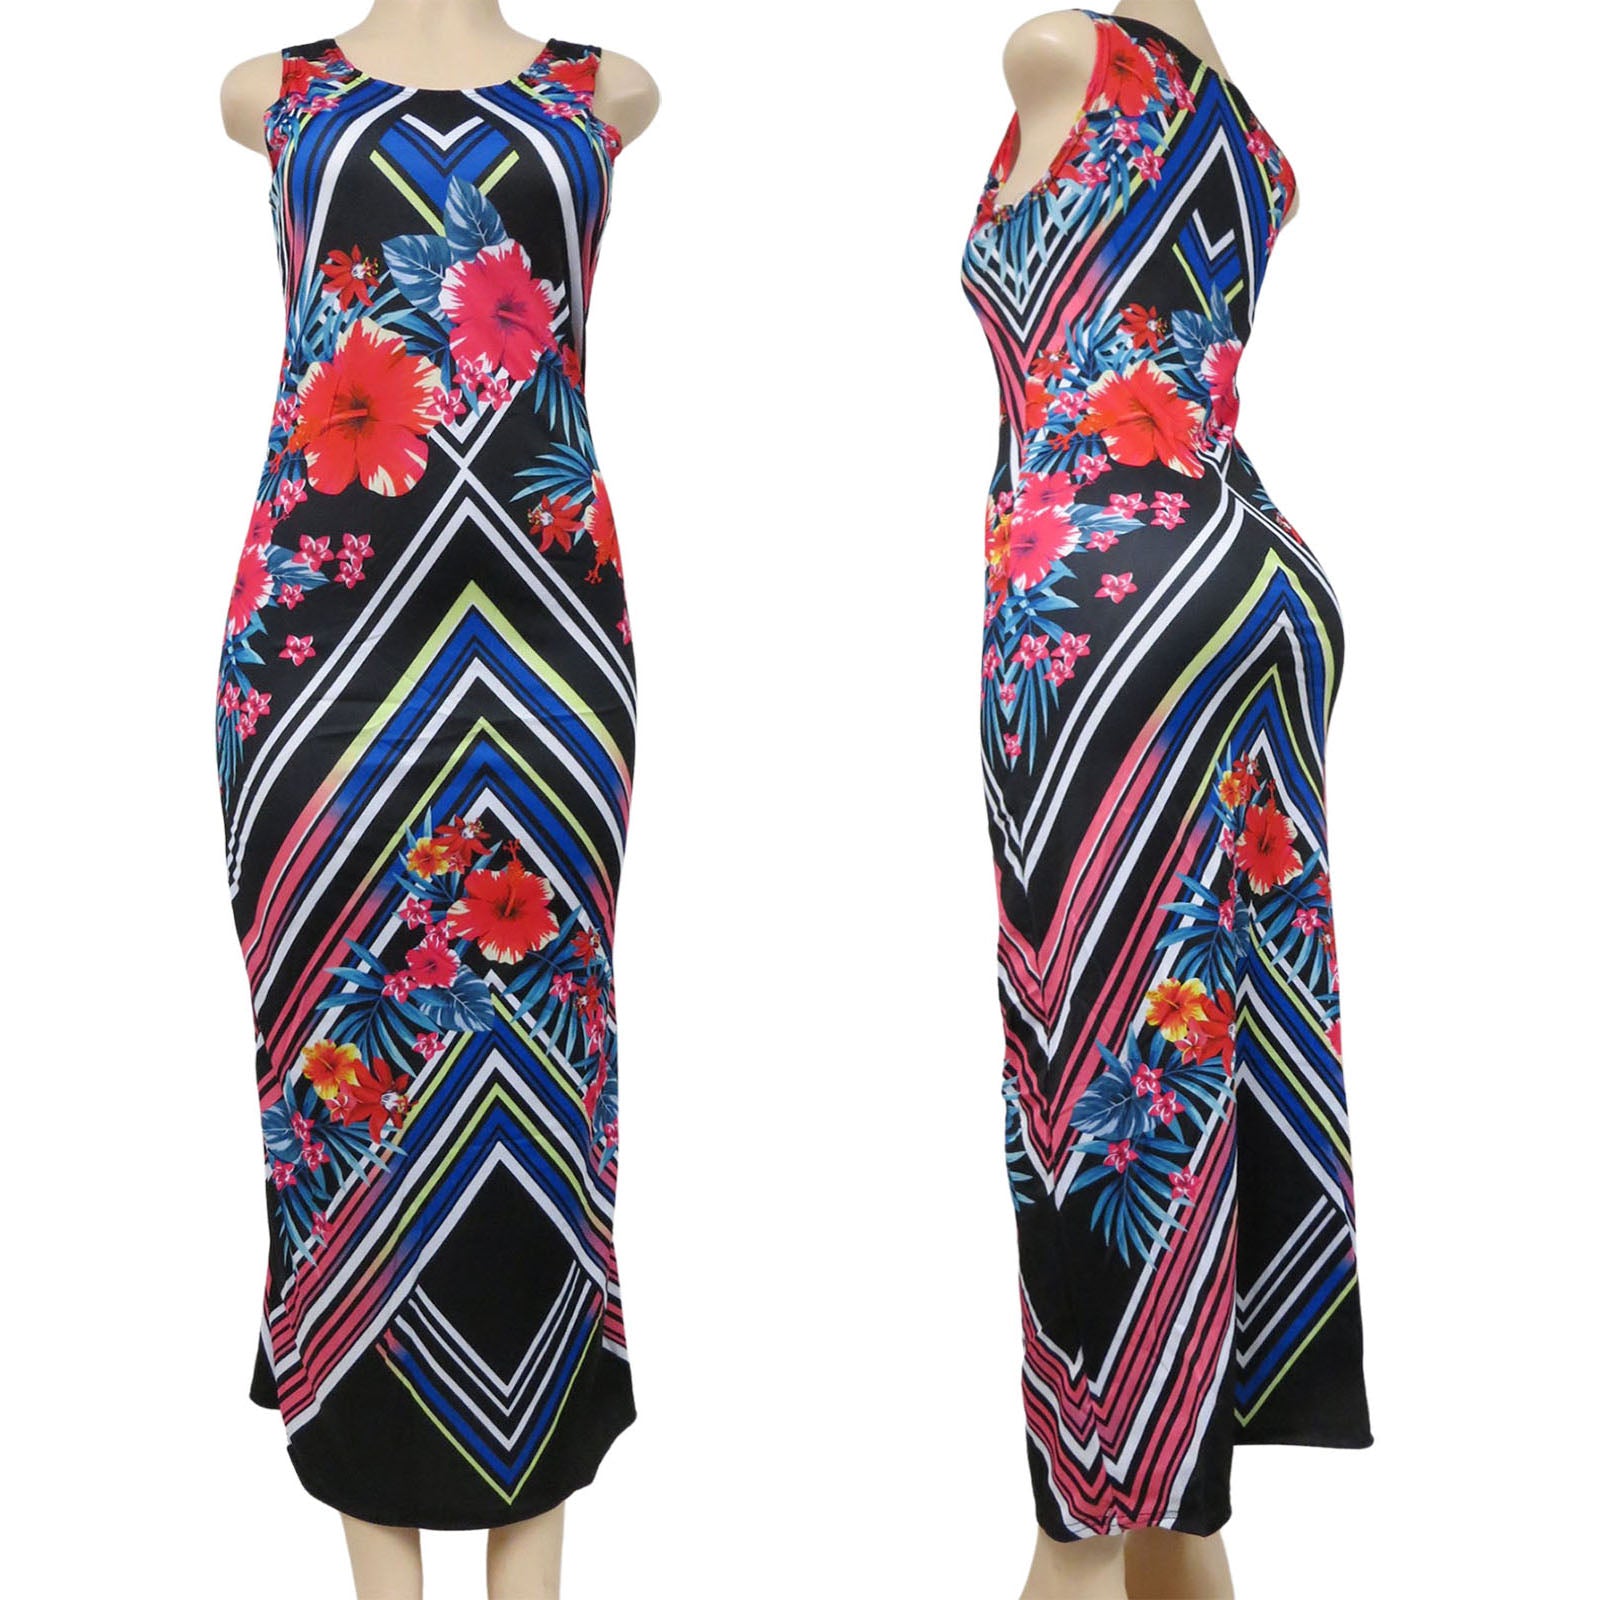 wholesale long sleeveless dress for women in an abstract floral pattern in black with blue pink and red accents